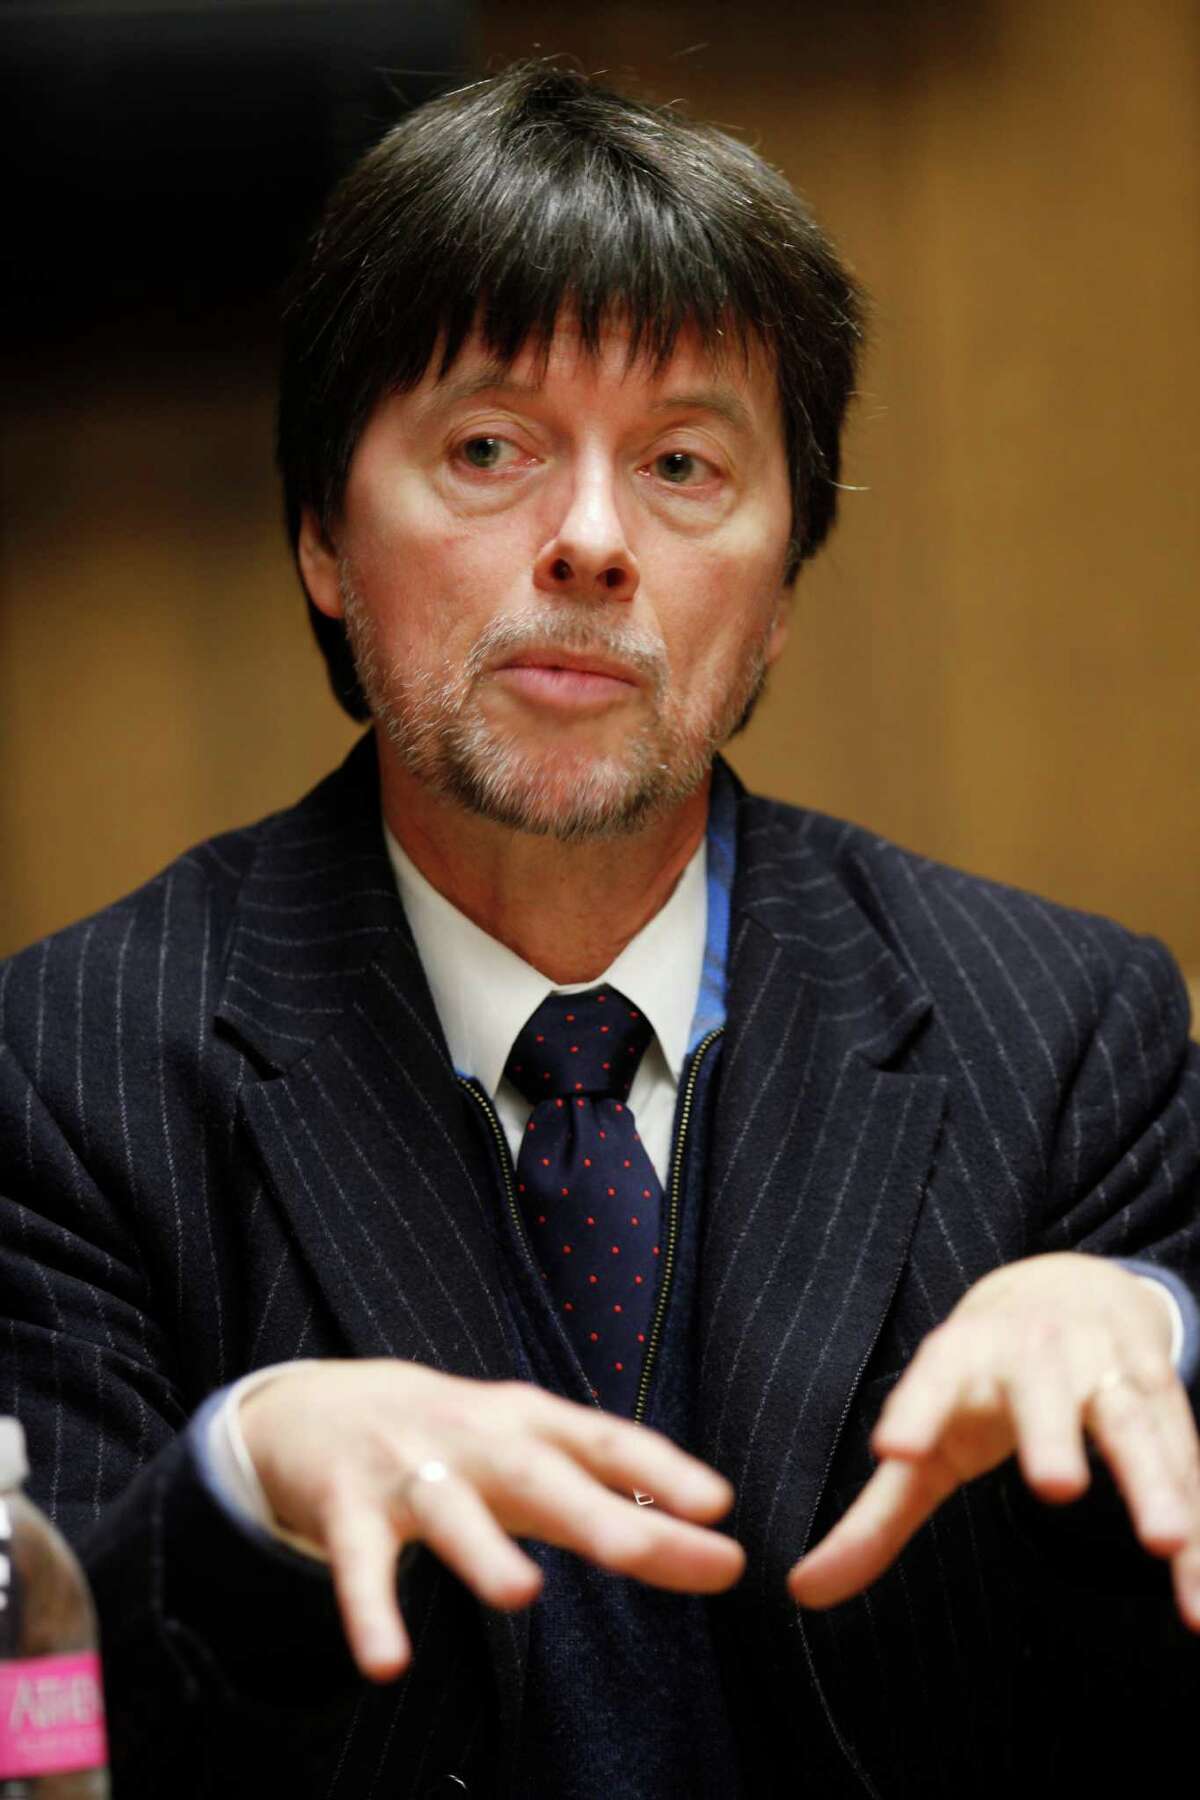 Documentary FIlm maker Ken Burns says that while his goal with "The Dust Bowl" is to tell a good story, working on the film makes it difficult to ignore recent weather events that also might have human causes behind their creation or severity.